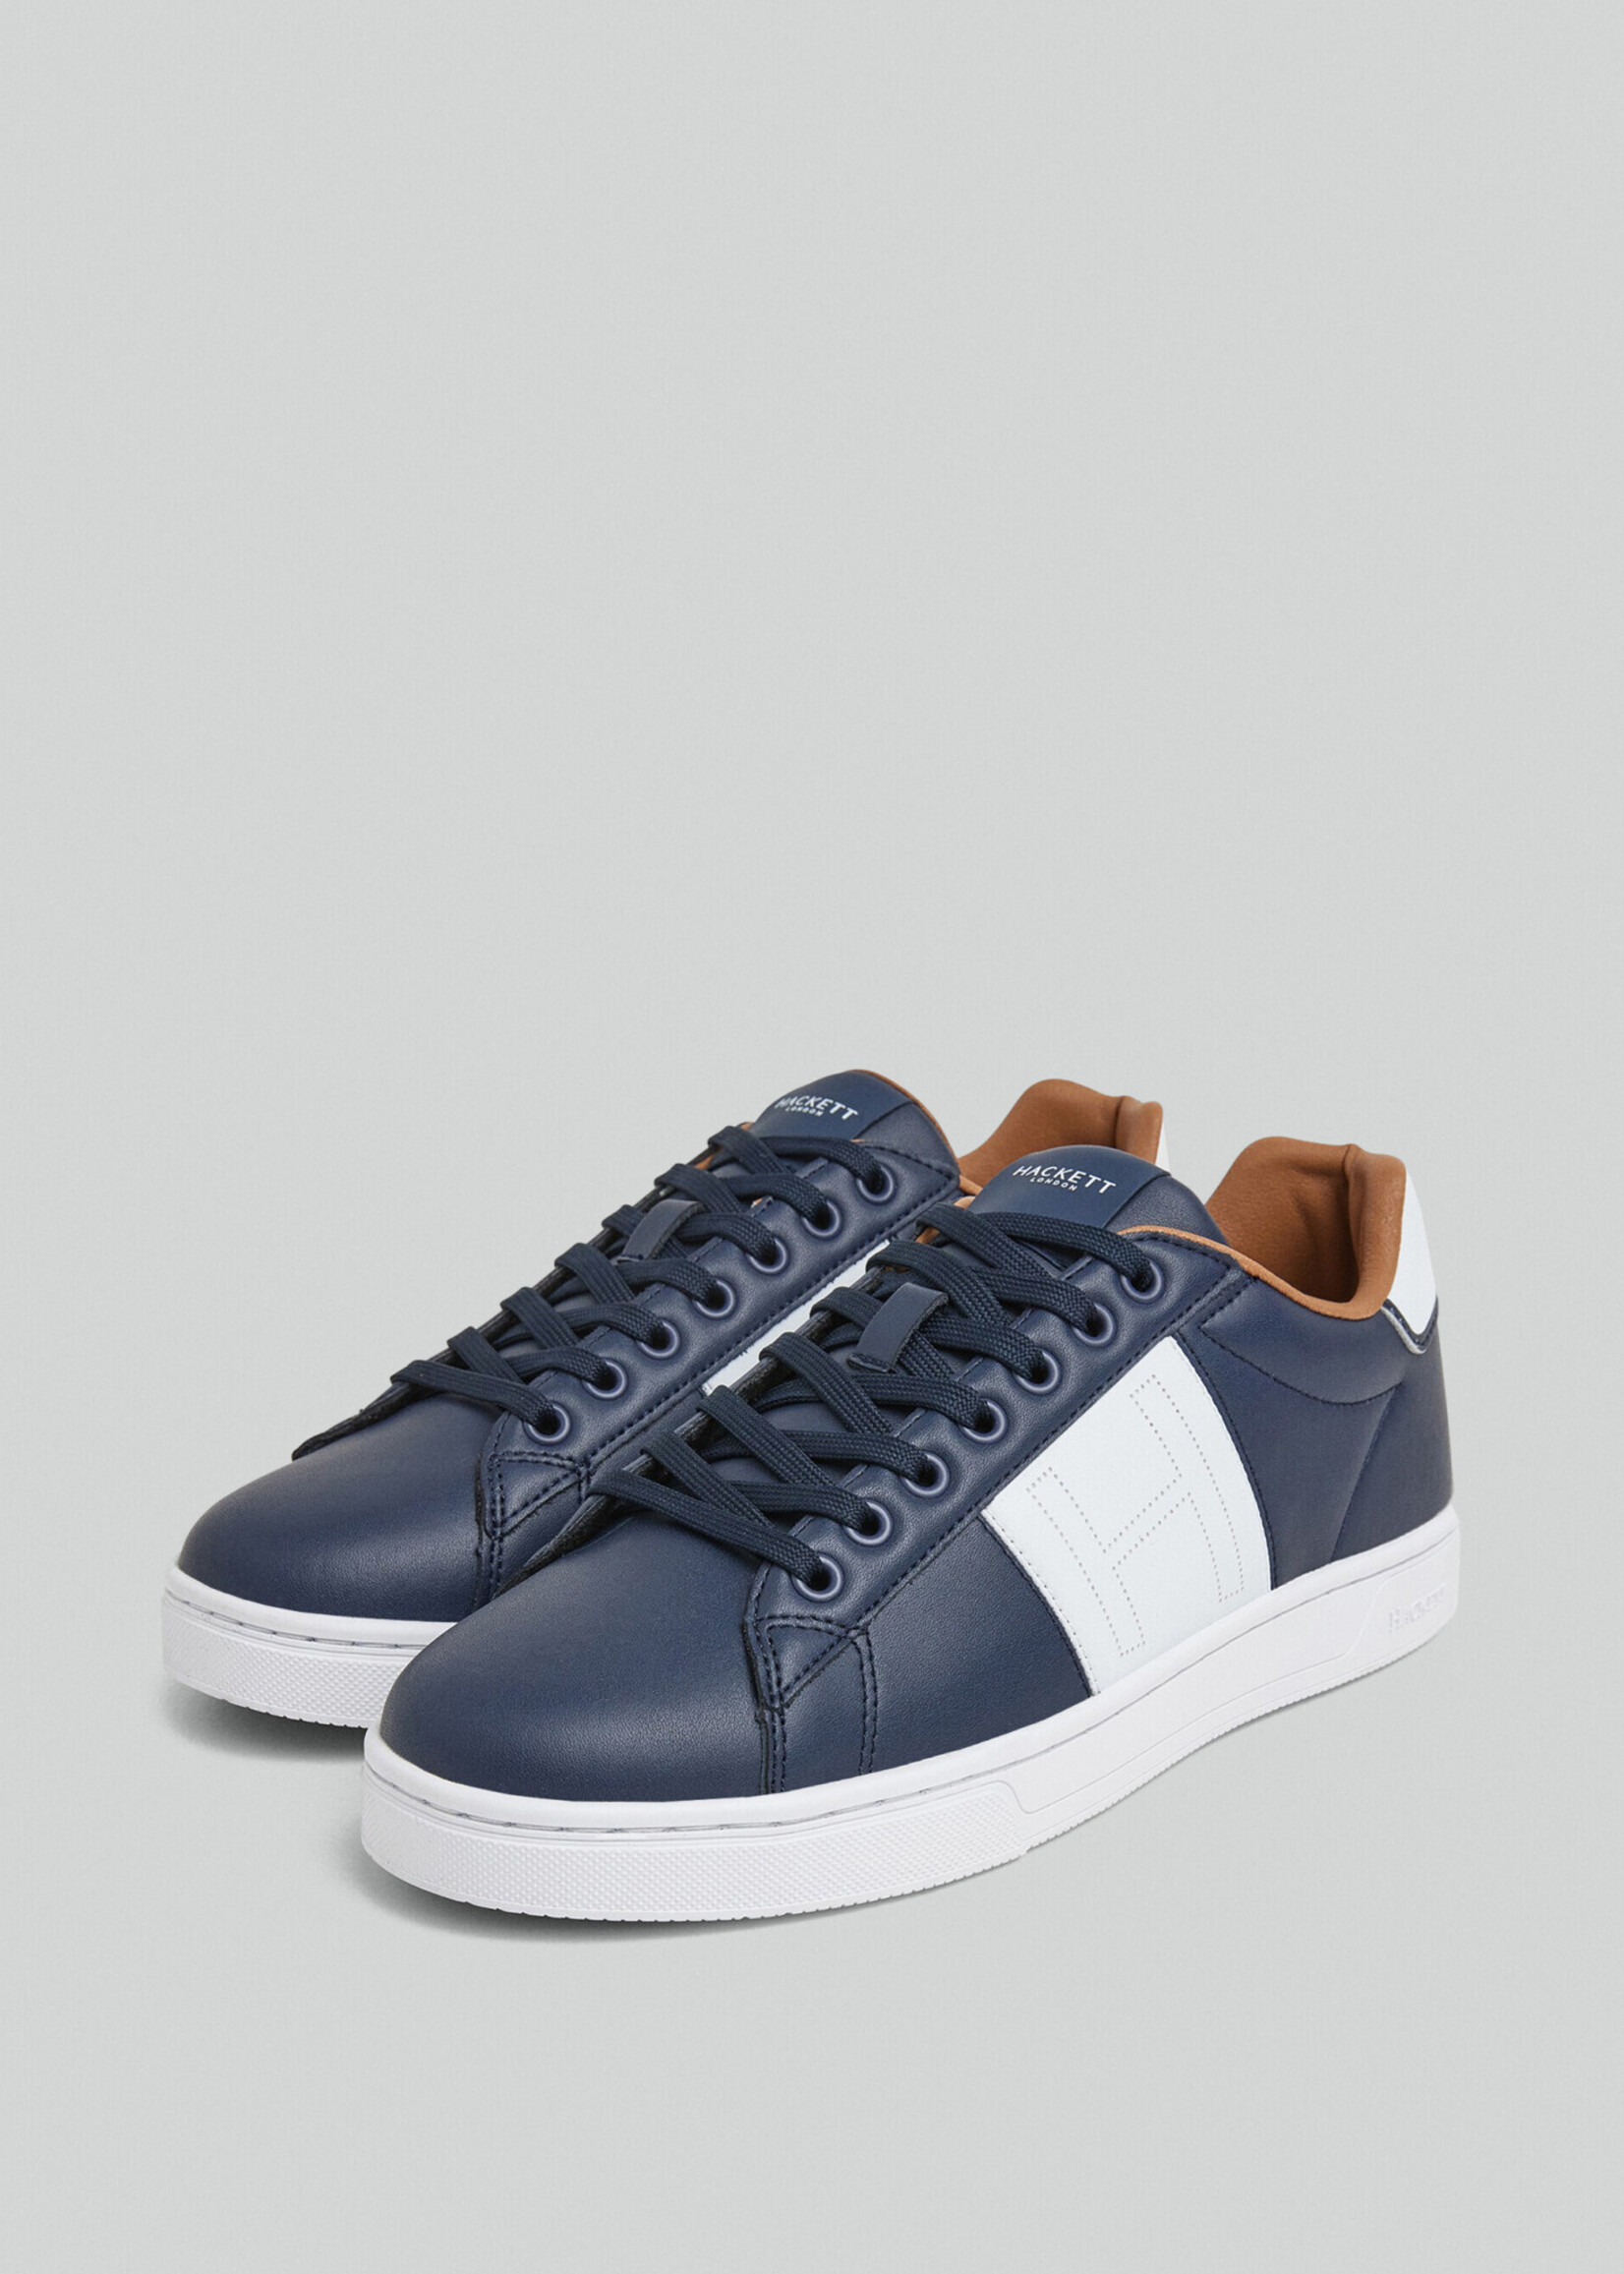 HACKETT Microperforated LeatherTrainers - Navy